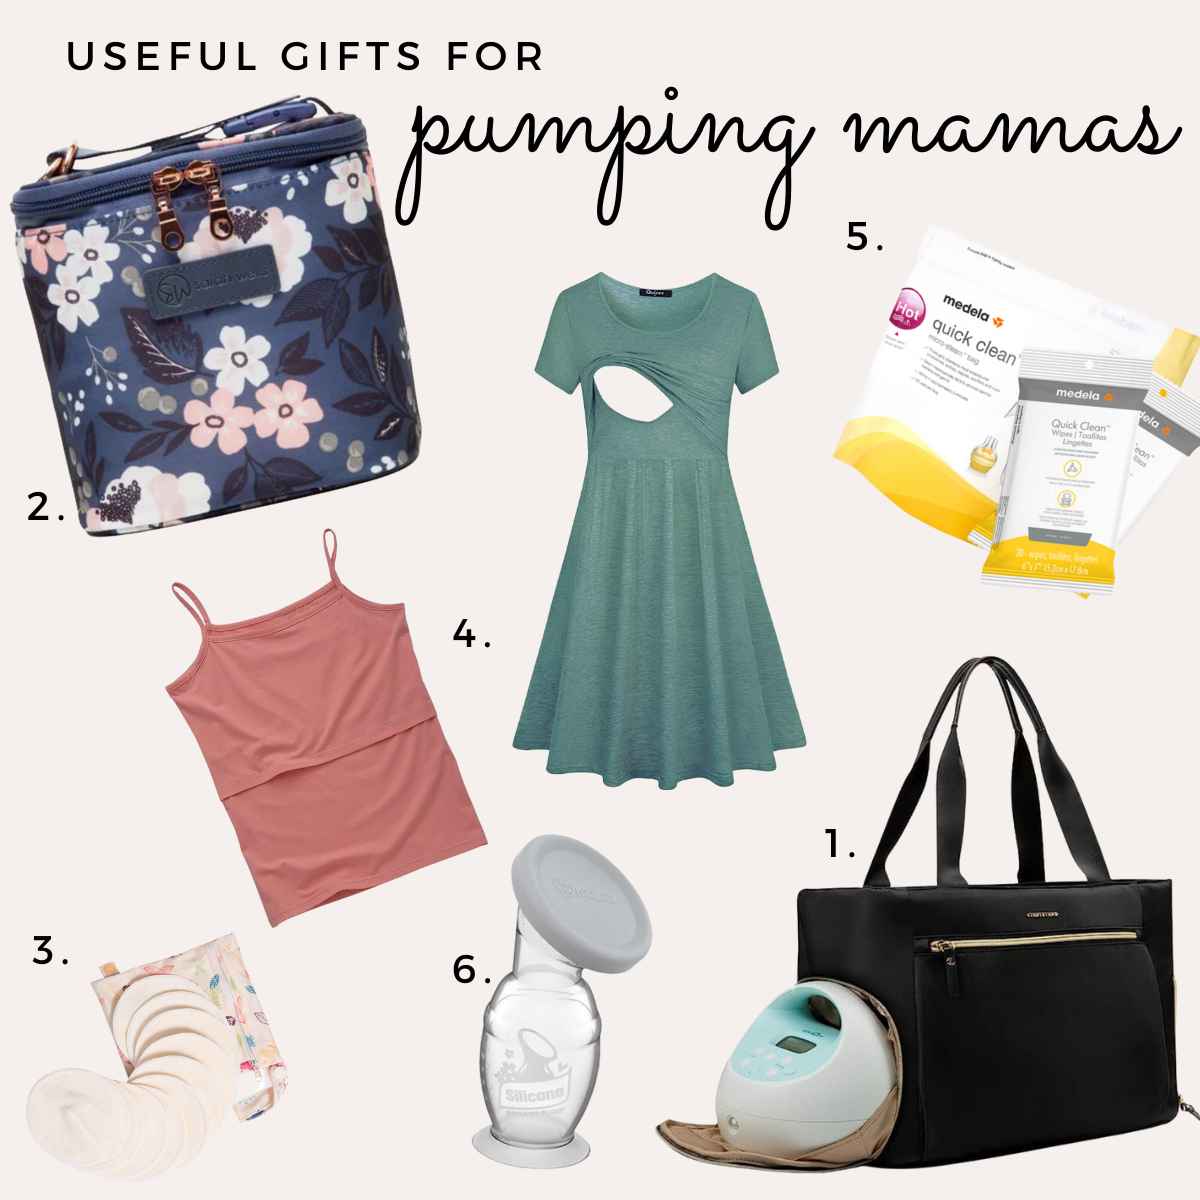 useful gift ideas for pumping mamas